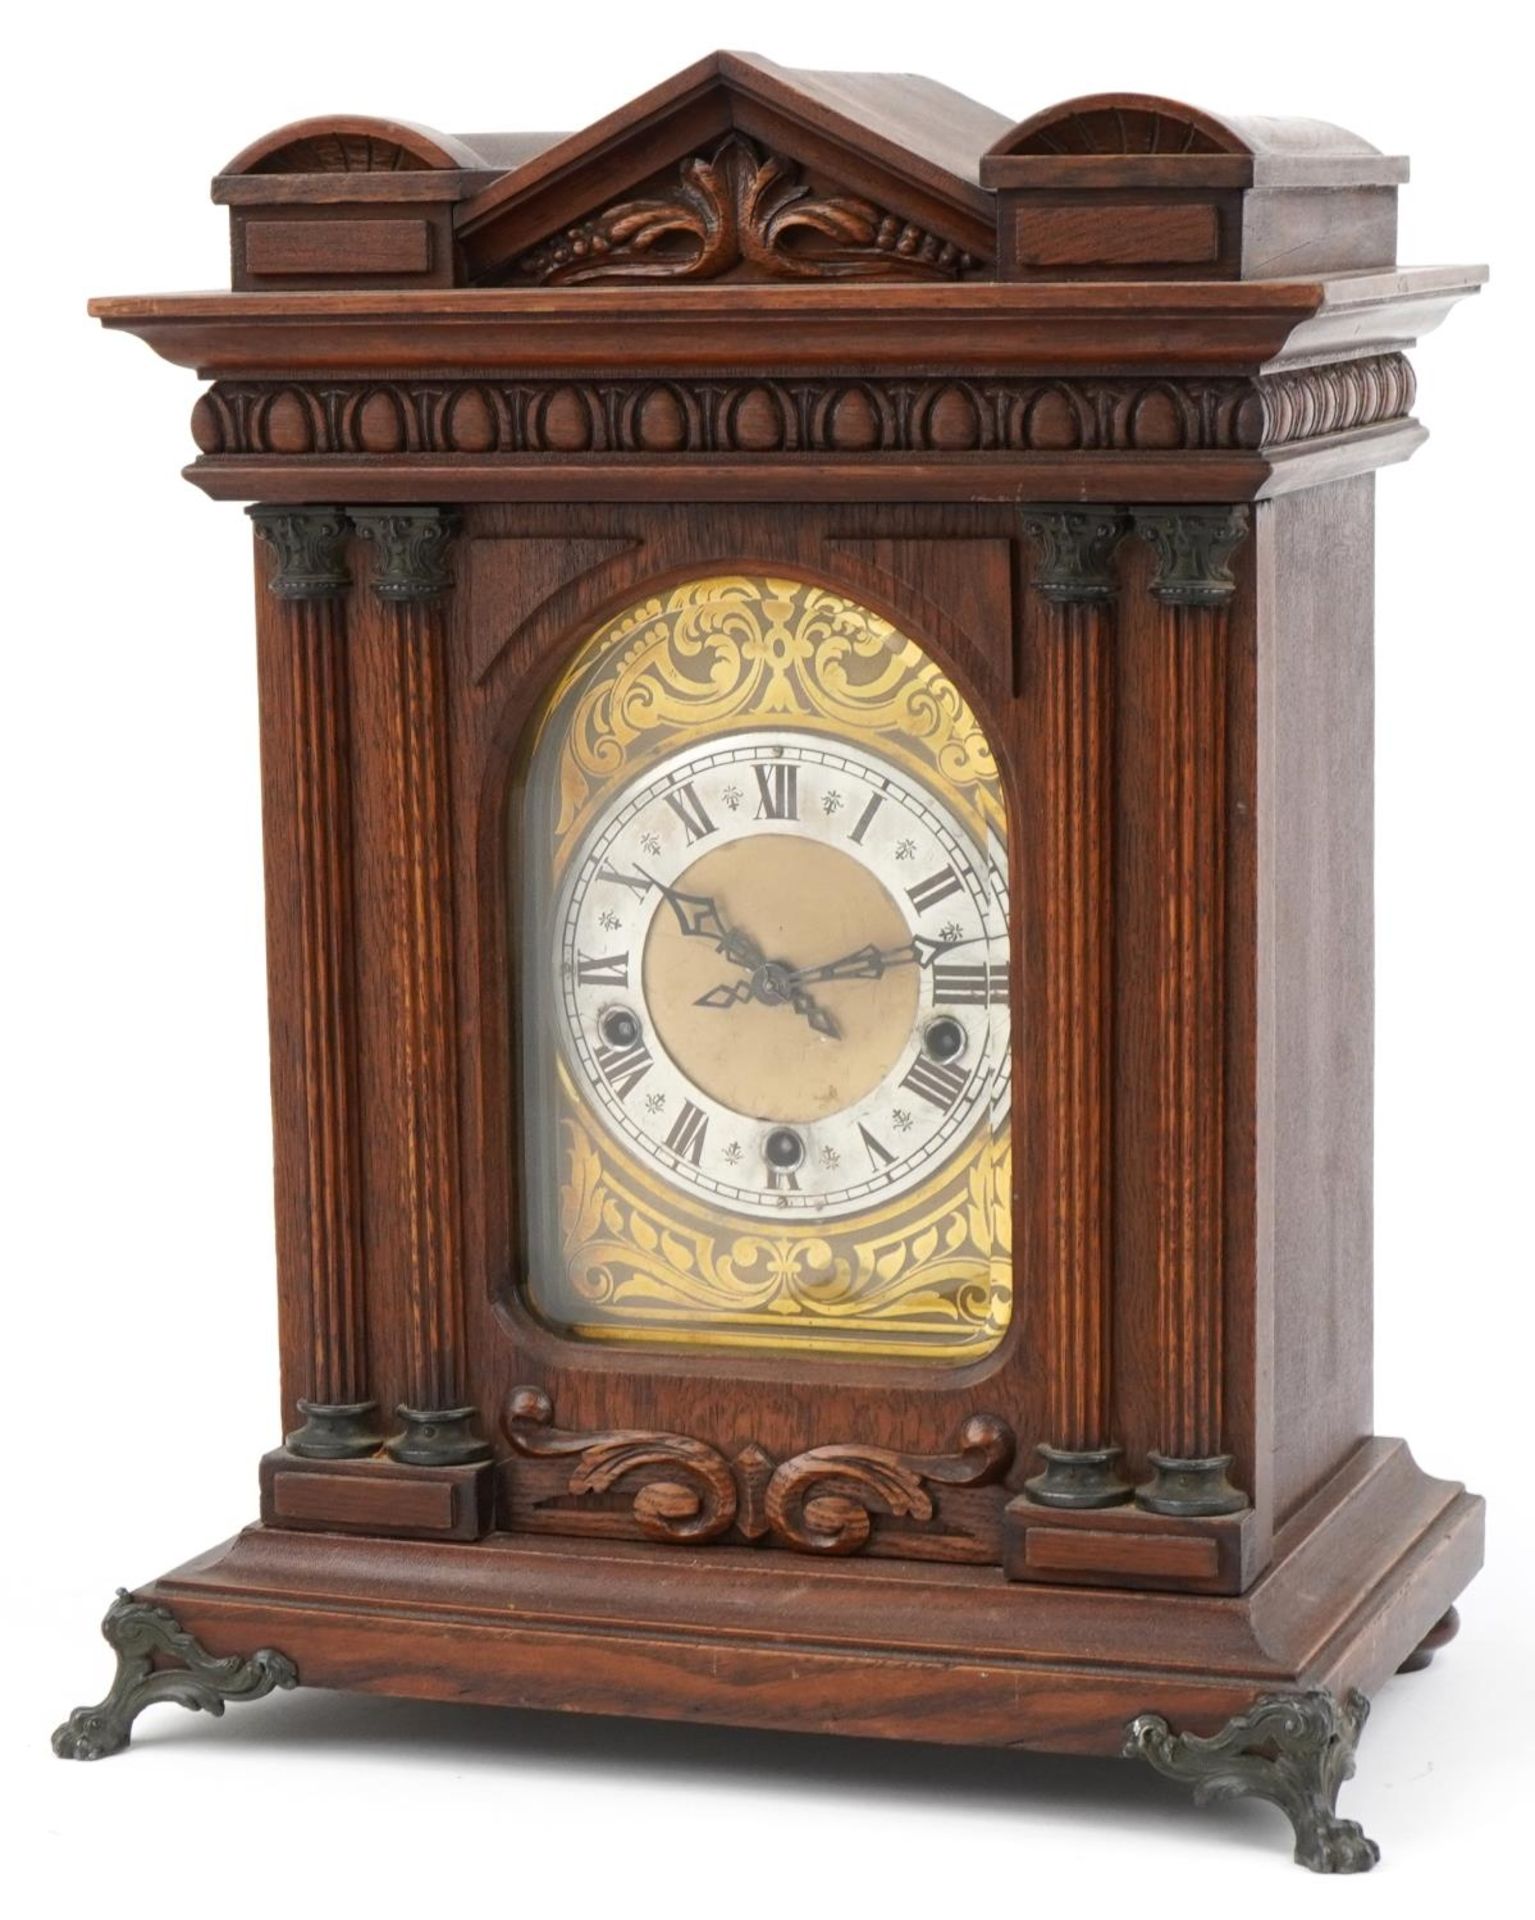 19th century oak bracket clock striking on five rods with Westminster chime, with Corinthian